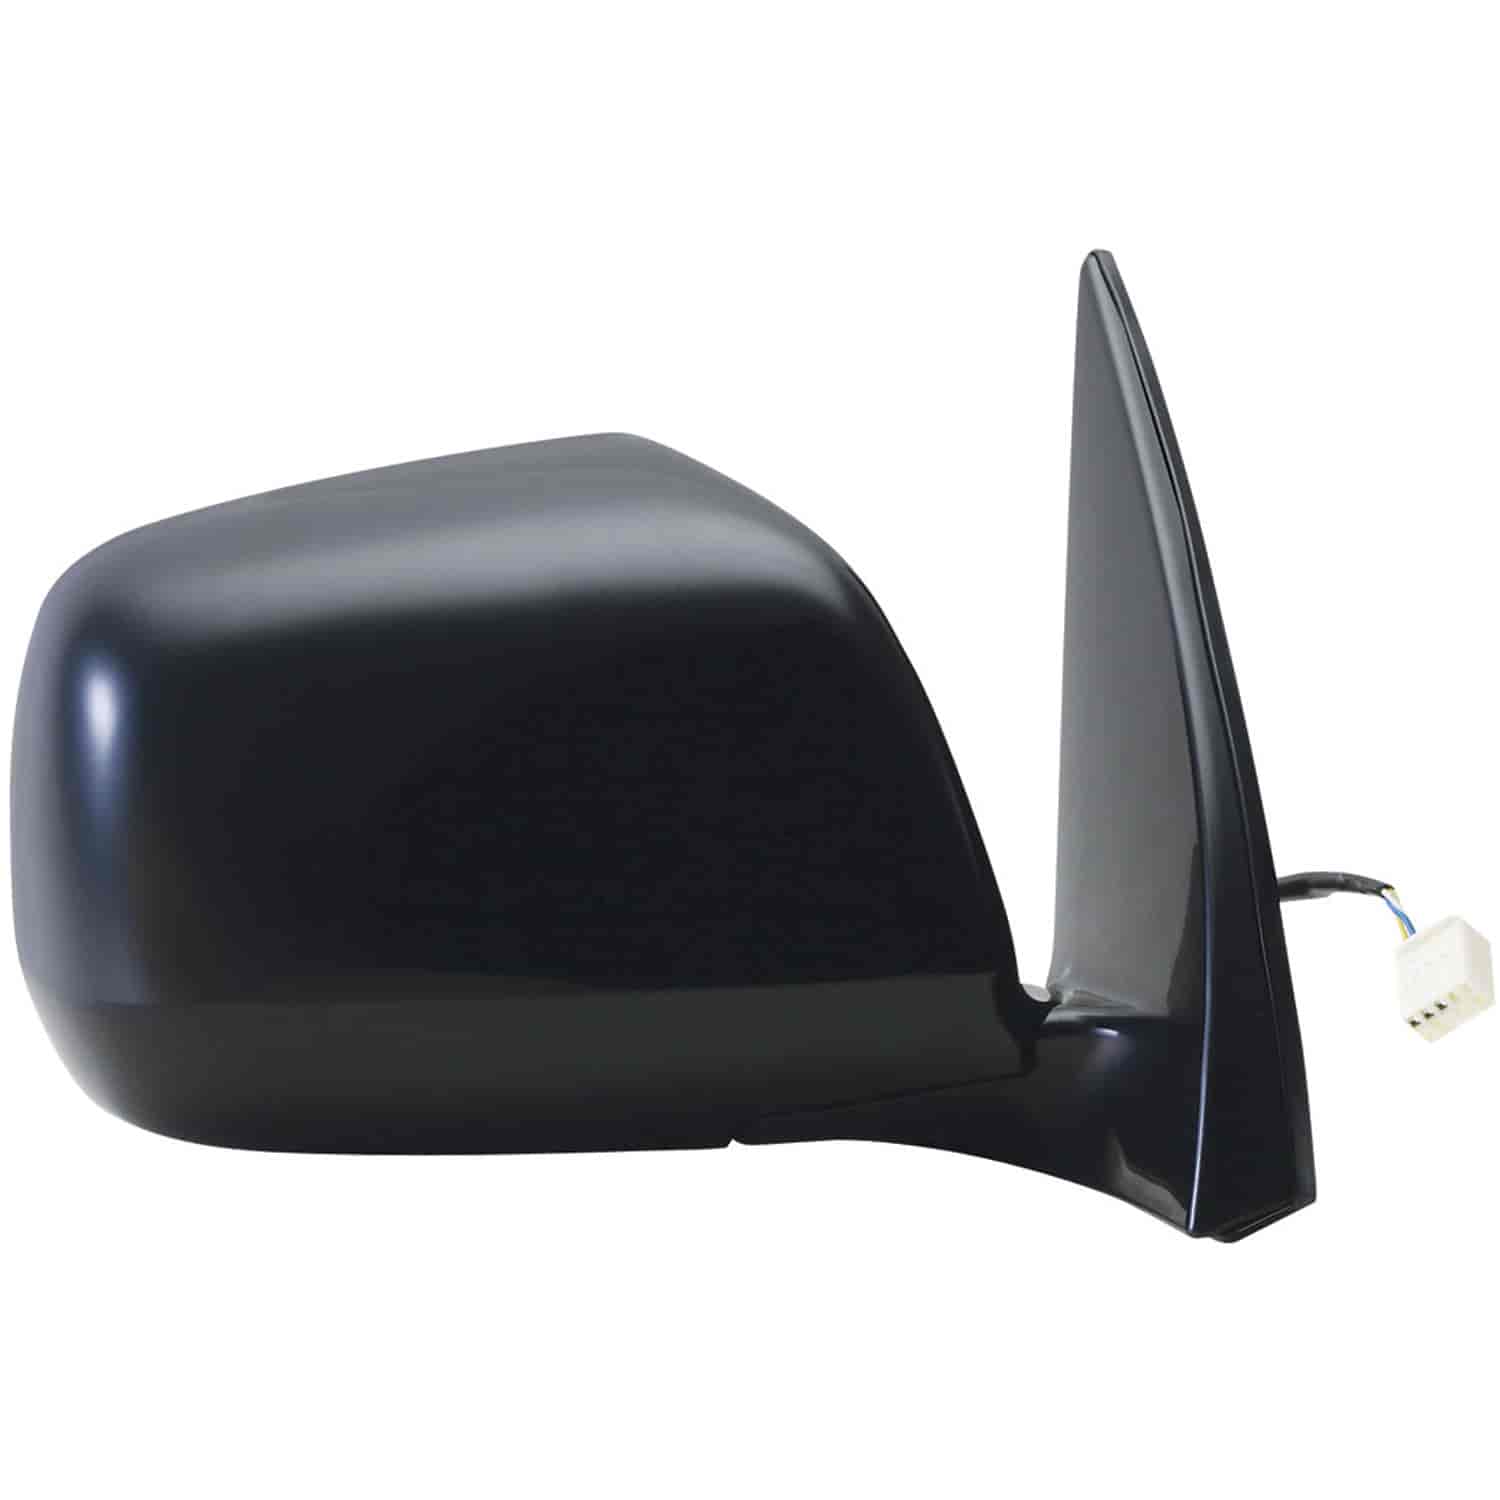 OEM Style Replacement mirror for 01-07 Toyota Highlander passenger side mirror tested to fit and fun